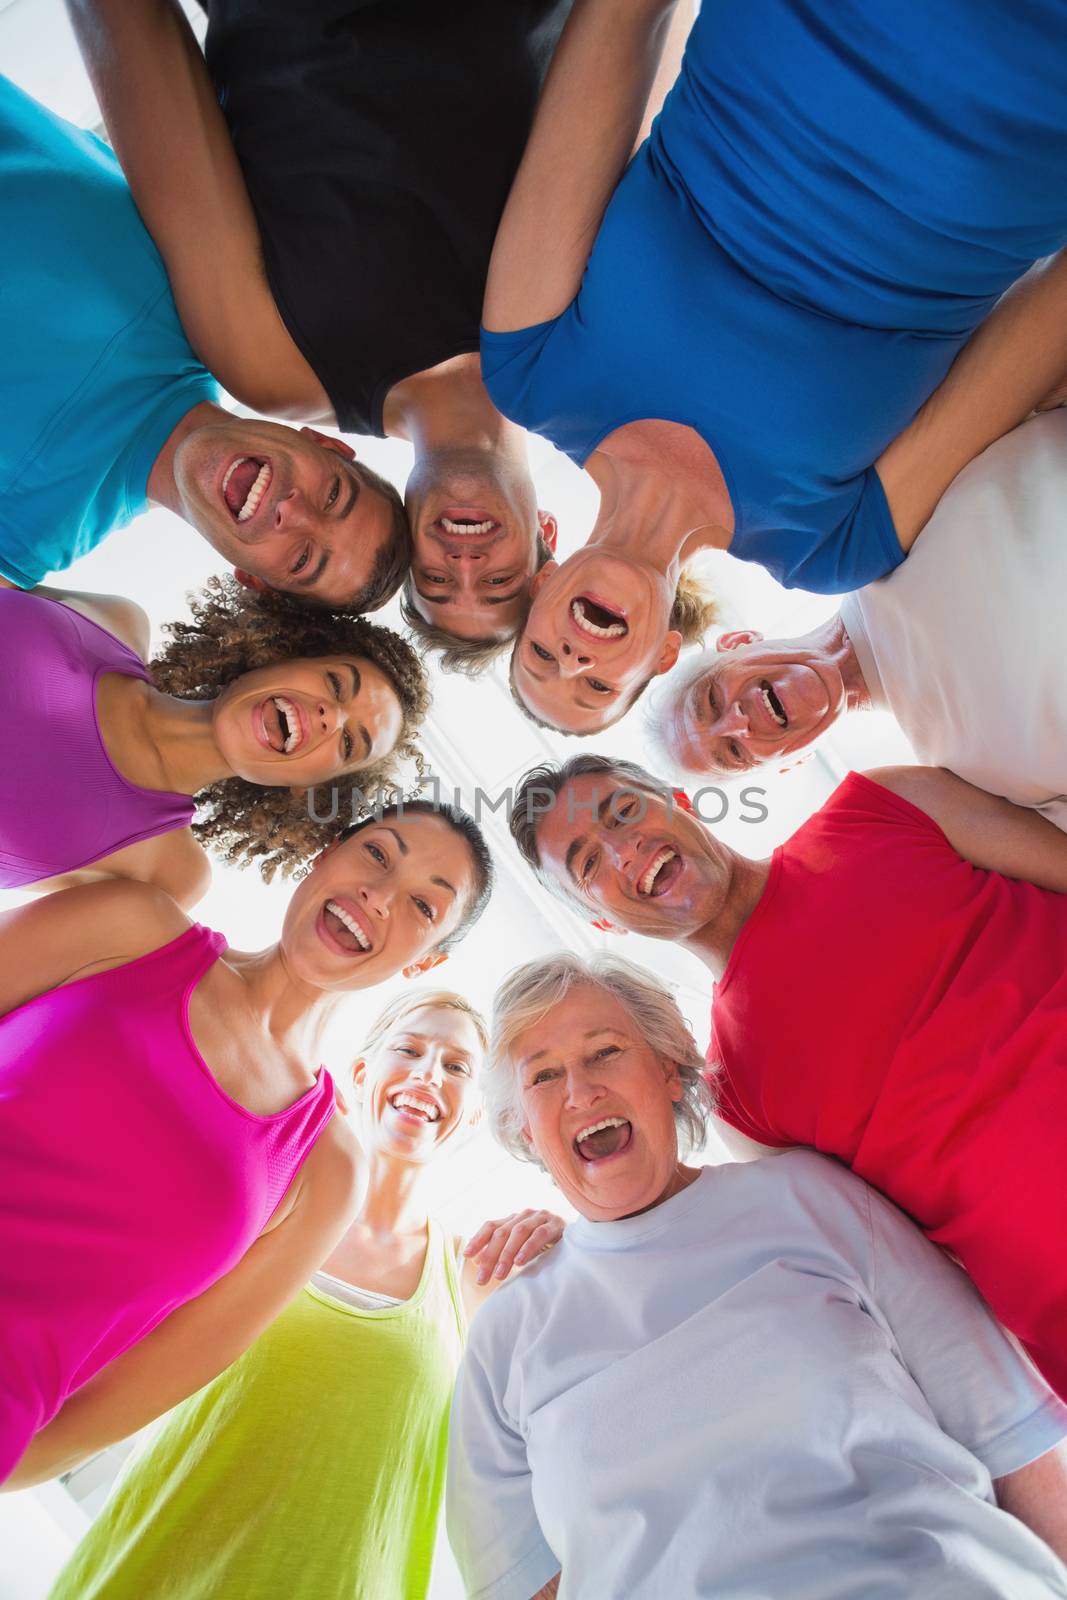 Cheerful people forming huddle at gym by Wavebreakmedia